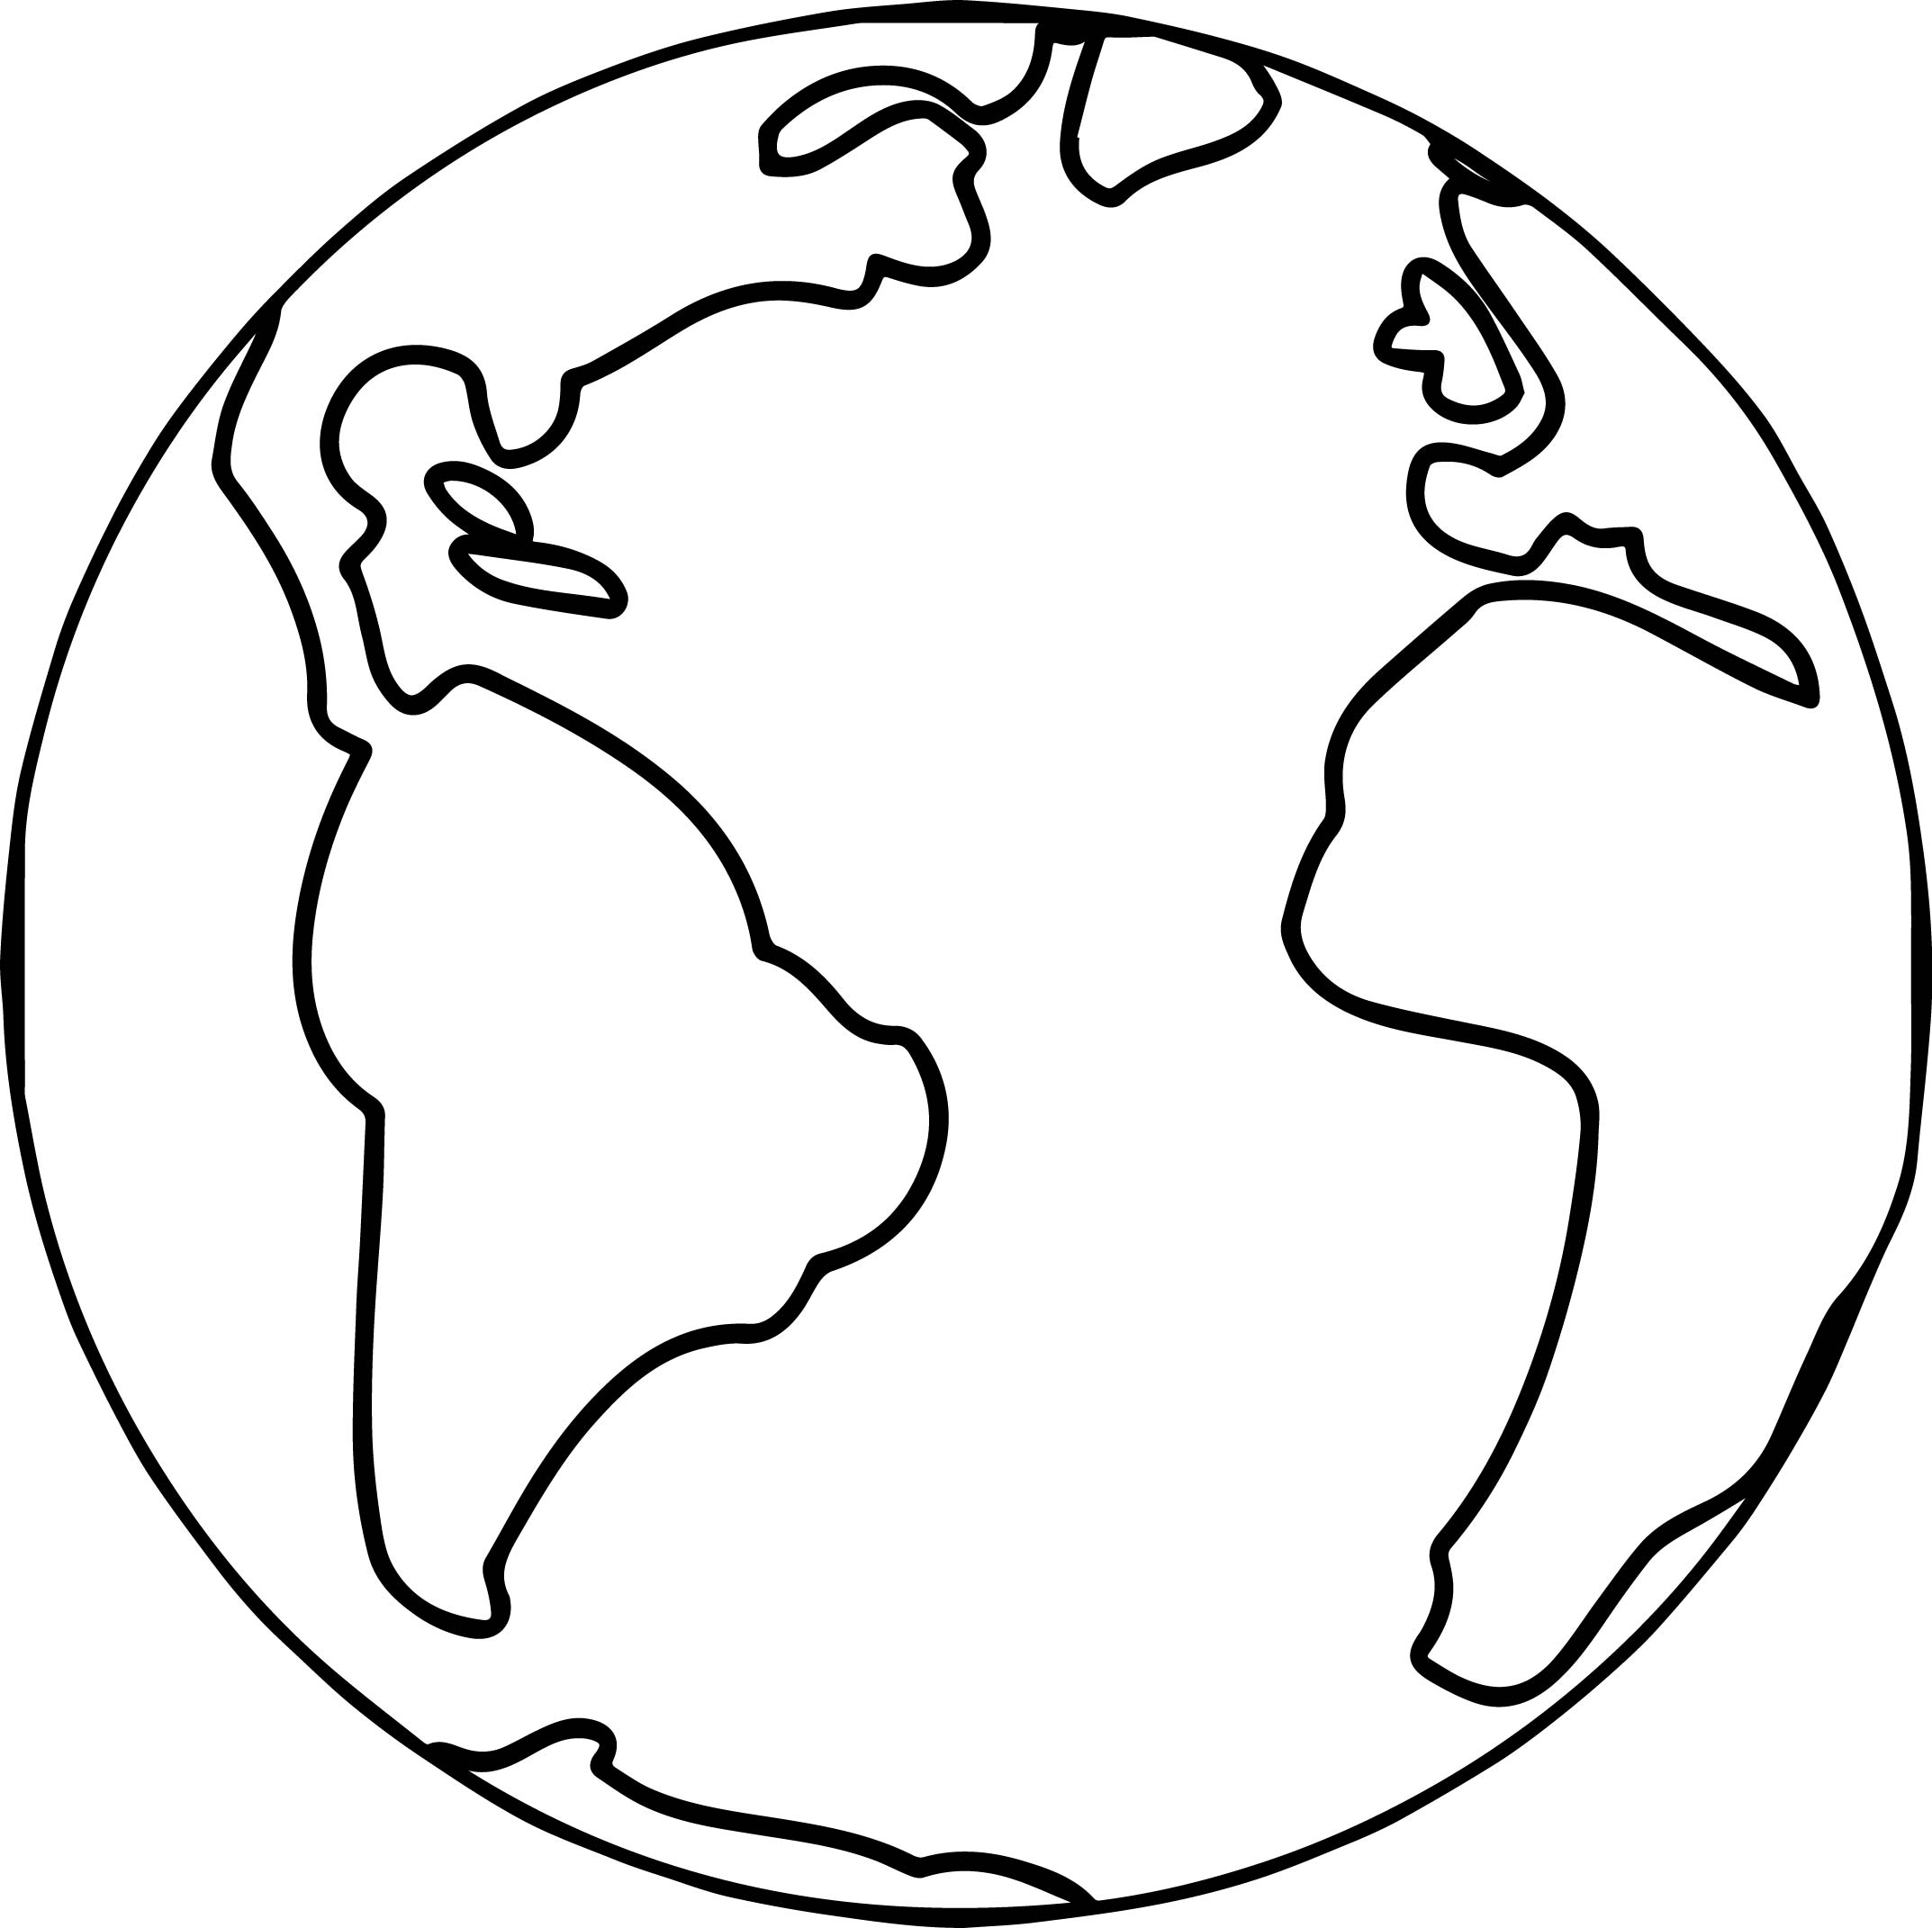 globe-outline-free-download-on-clipartmag